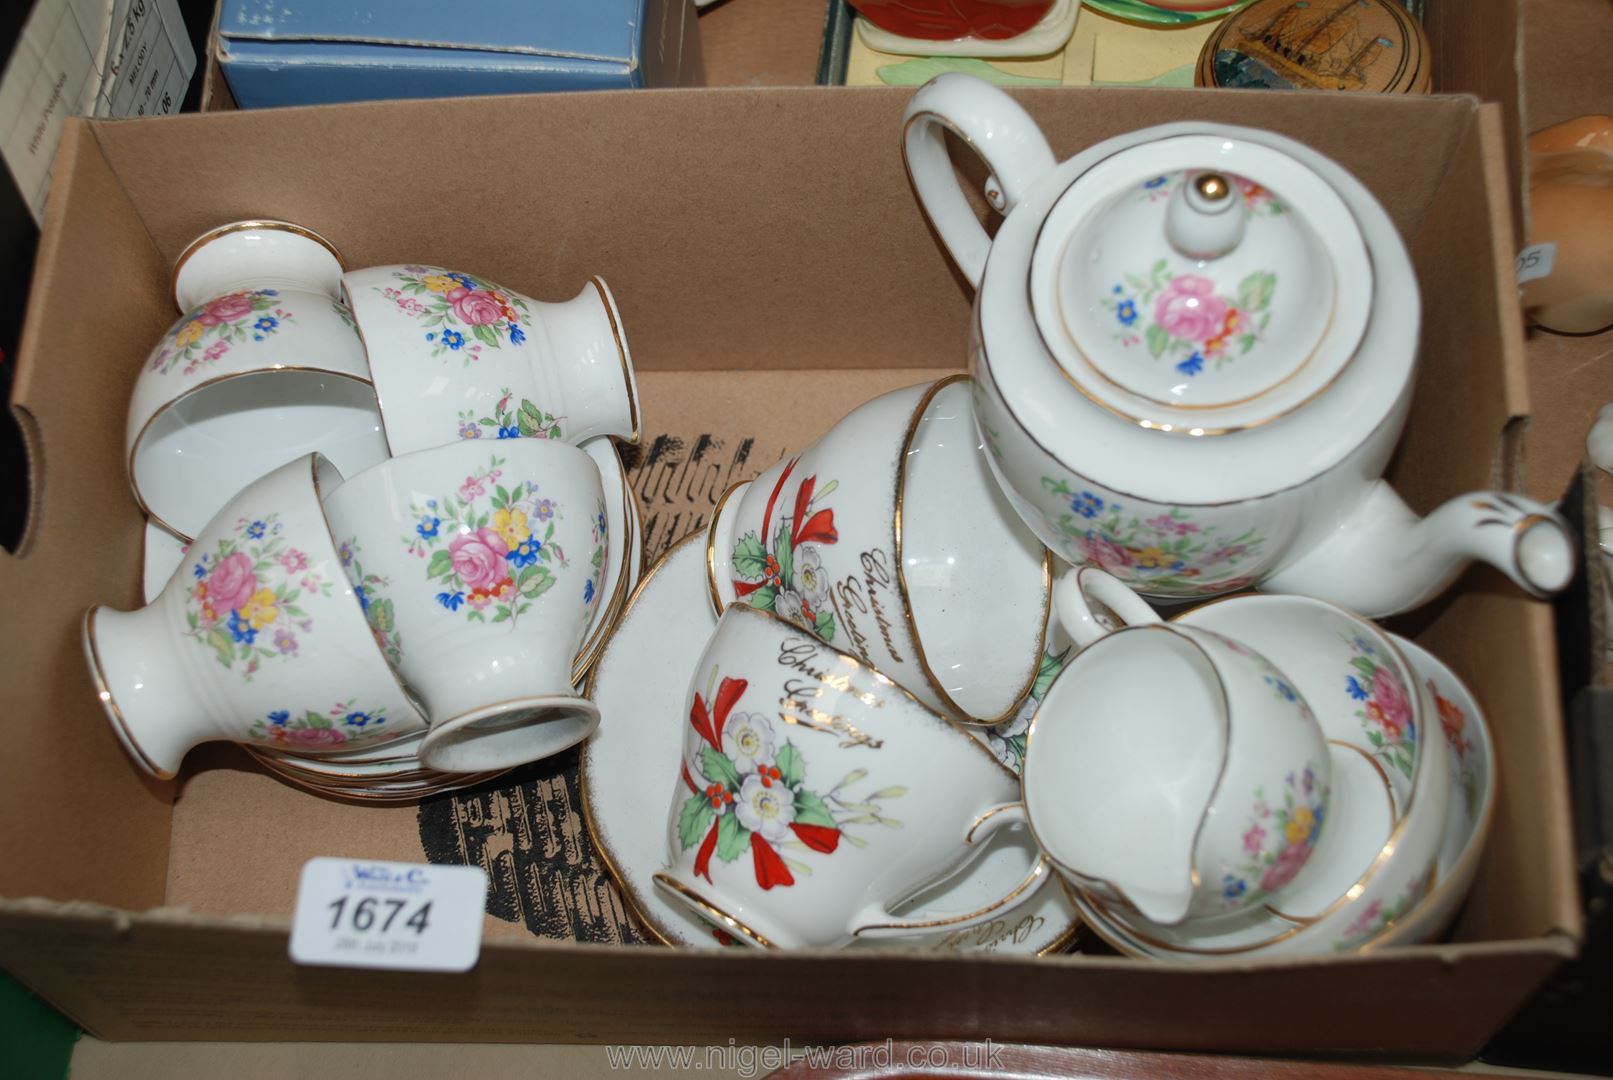 A Royal Standard Part Floral Service T/W a Pair of Christmas Cups & Saucers.